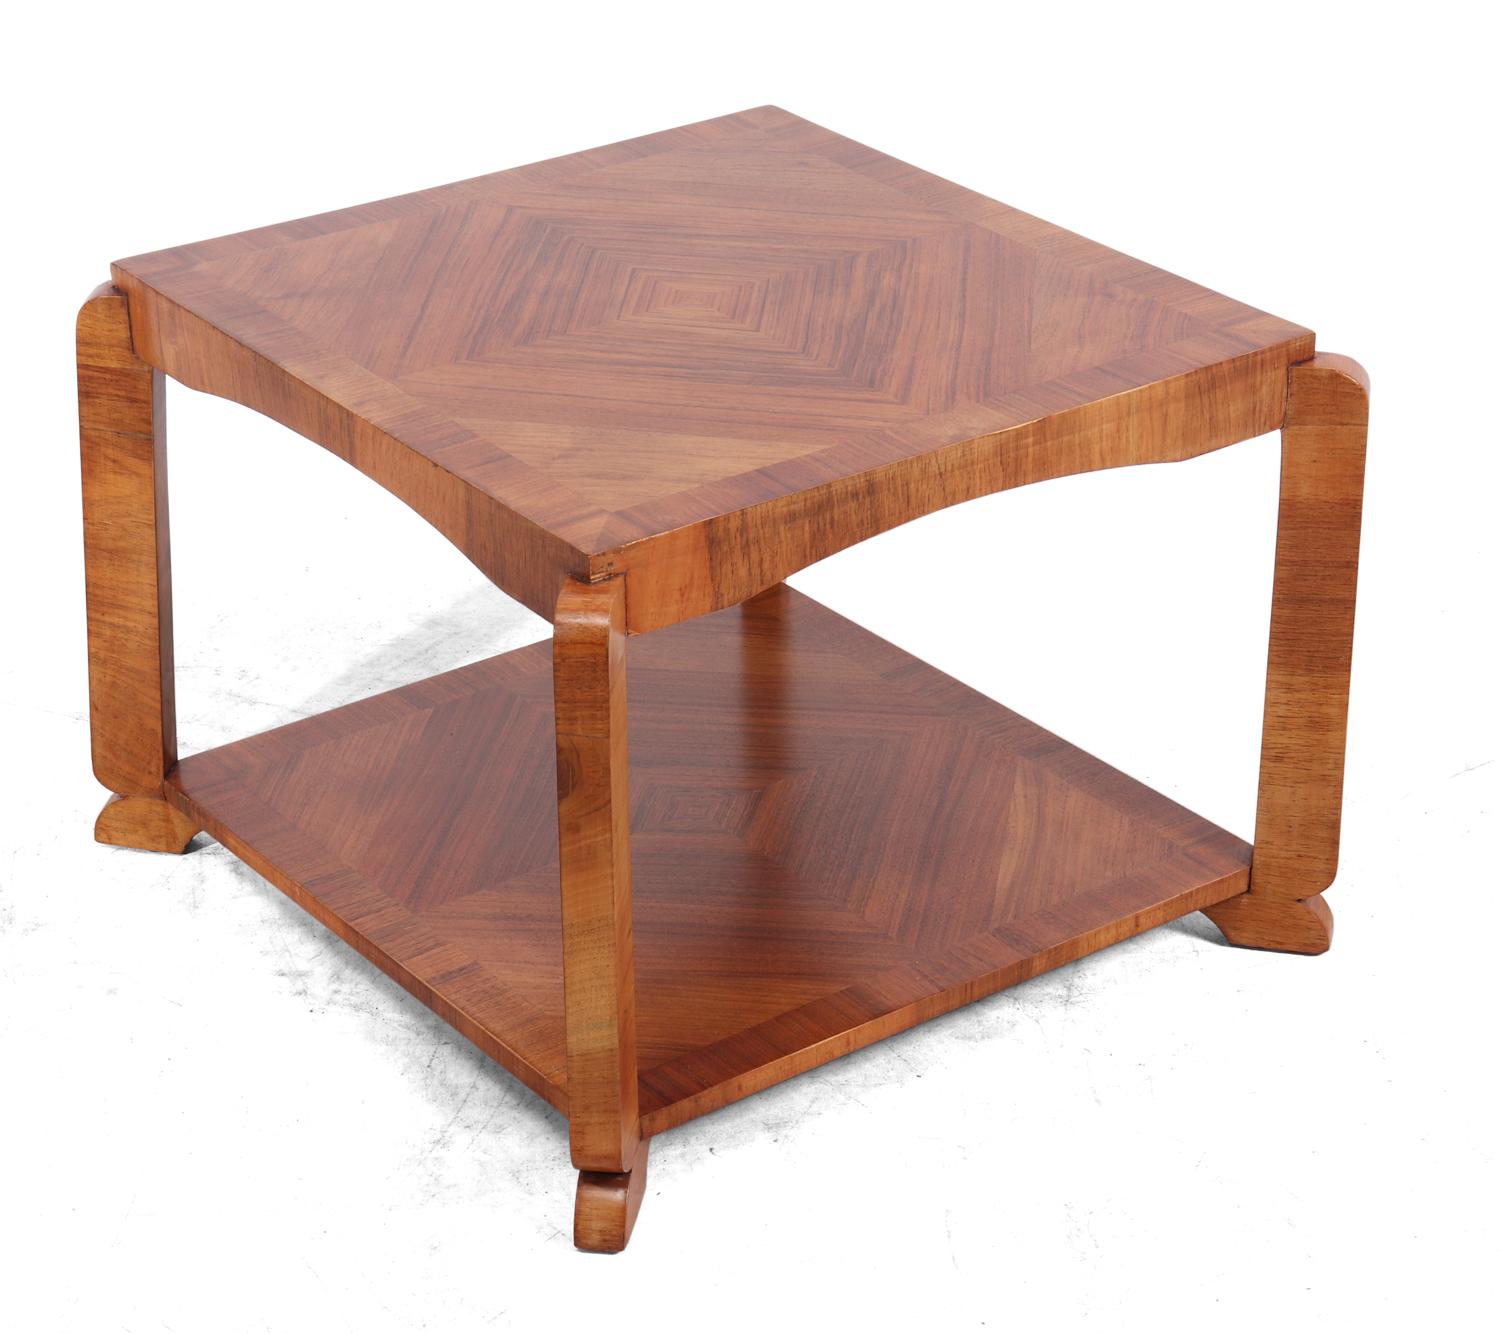 Art Deco walnut square coffee table, circa 1930
This Art Deco coffee table is a square two tier table that has been fully polished and is in good condition throughout it has quarter cut veneer with crossbanding on both levels

Age: 1930

Style: